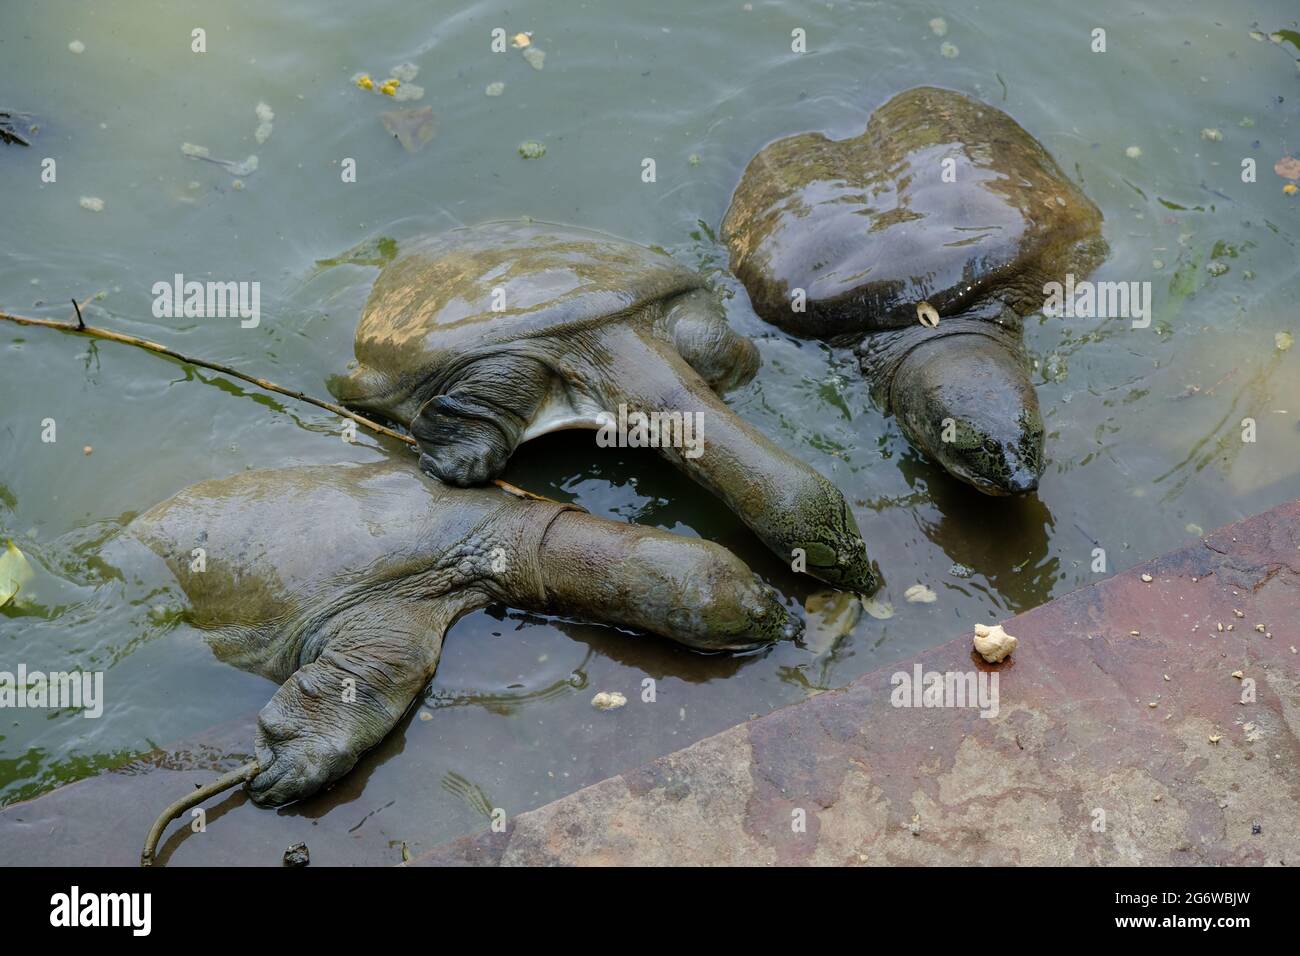 India Agra - Chelydra serpentina - Common snapping turtle Yamuna River Stock Photo